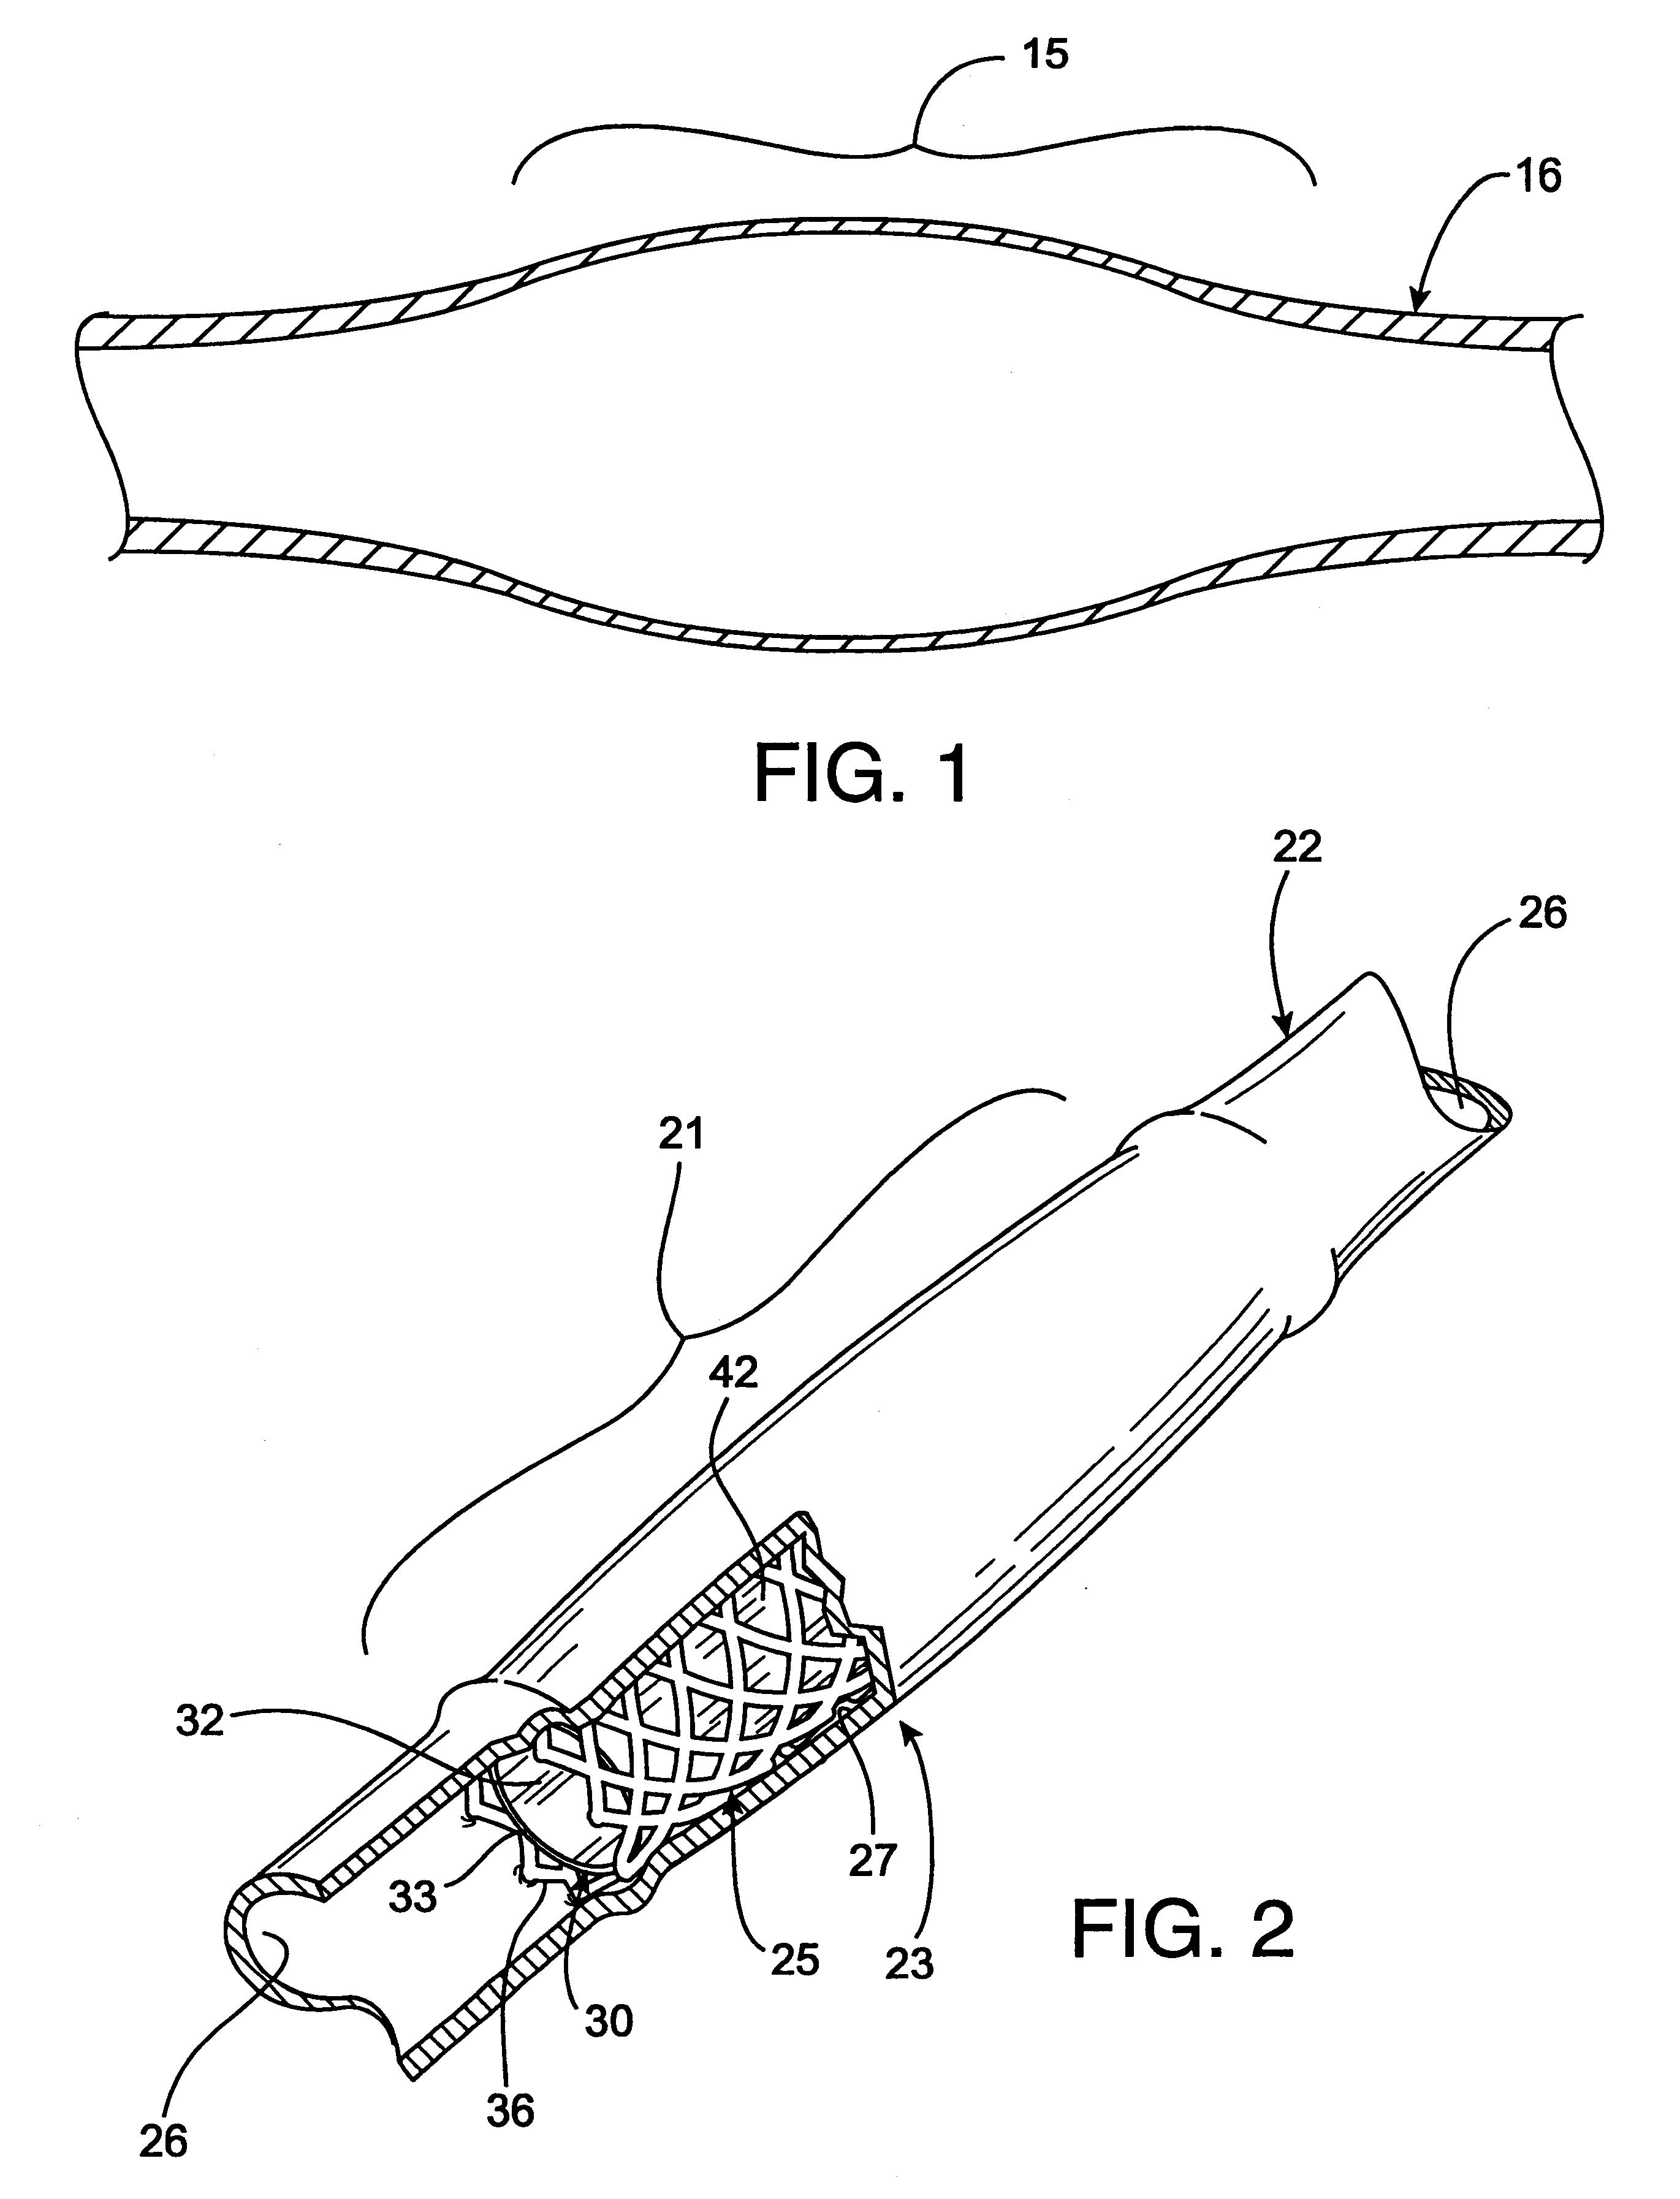 Radioactive intraluminal endovascular prosthesis and method for the treatment of aneurysms